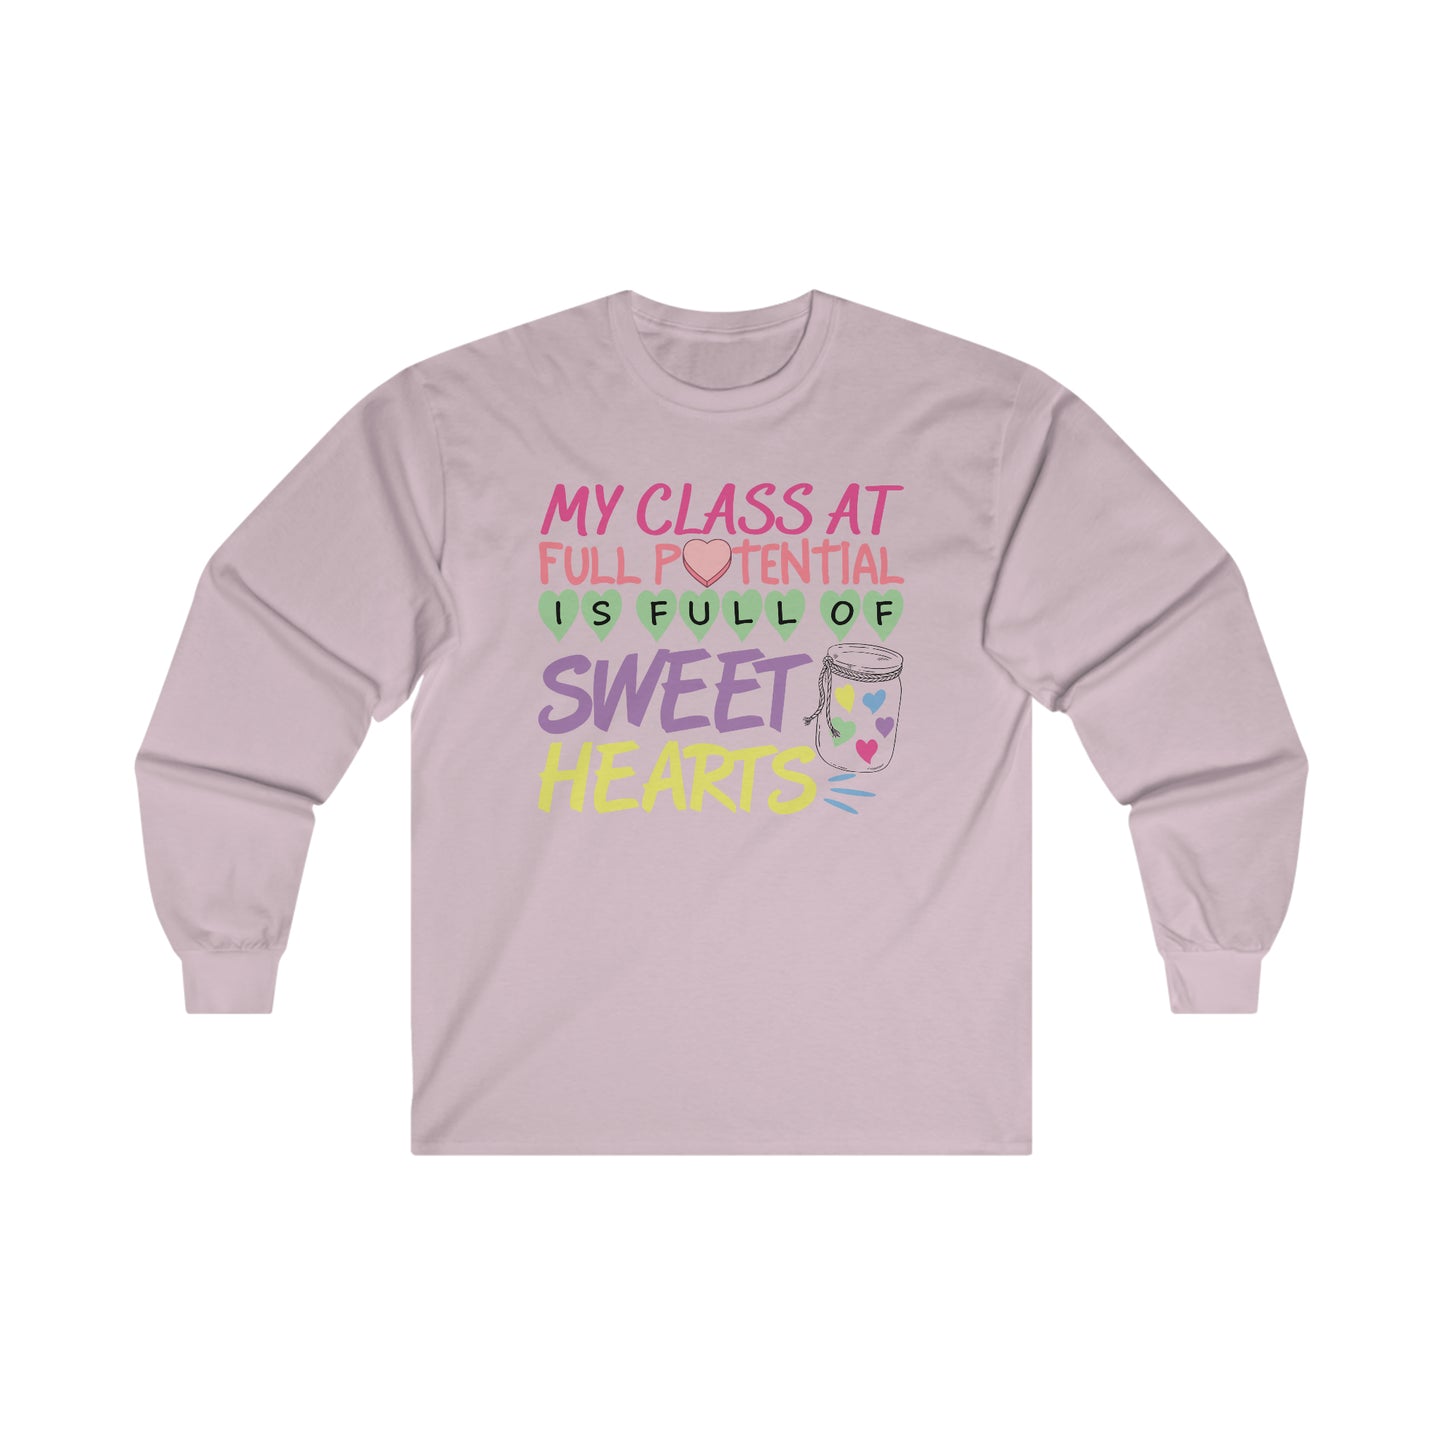 My Class At Full Potential Is Full Of Sweet Hearts Ultra Cotton Long Sleeve Tee - Gildan